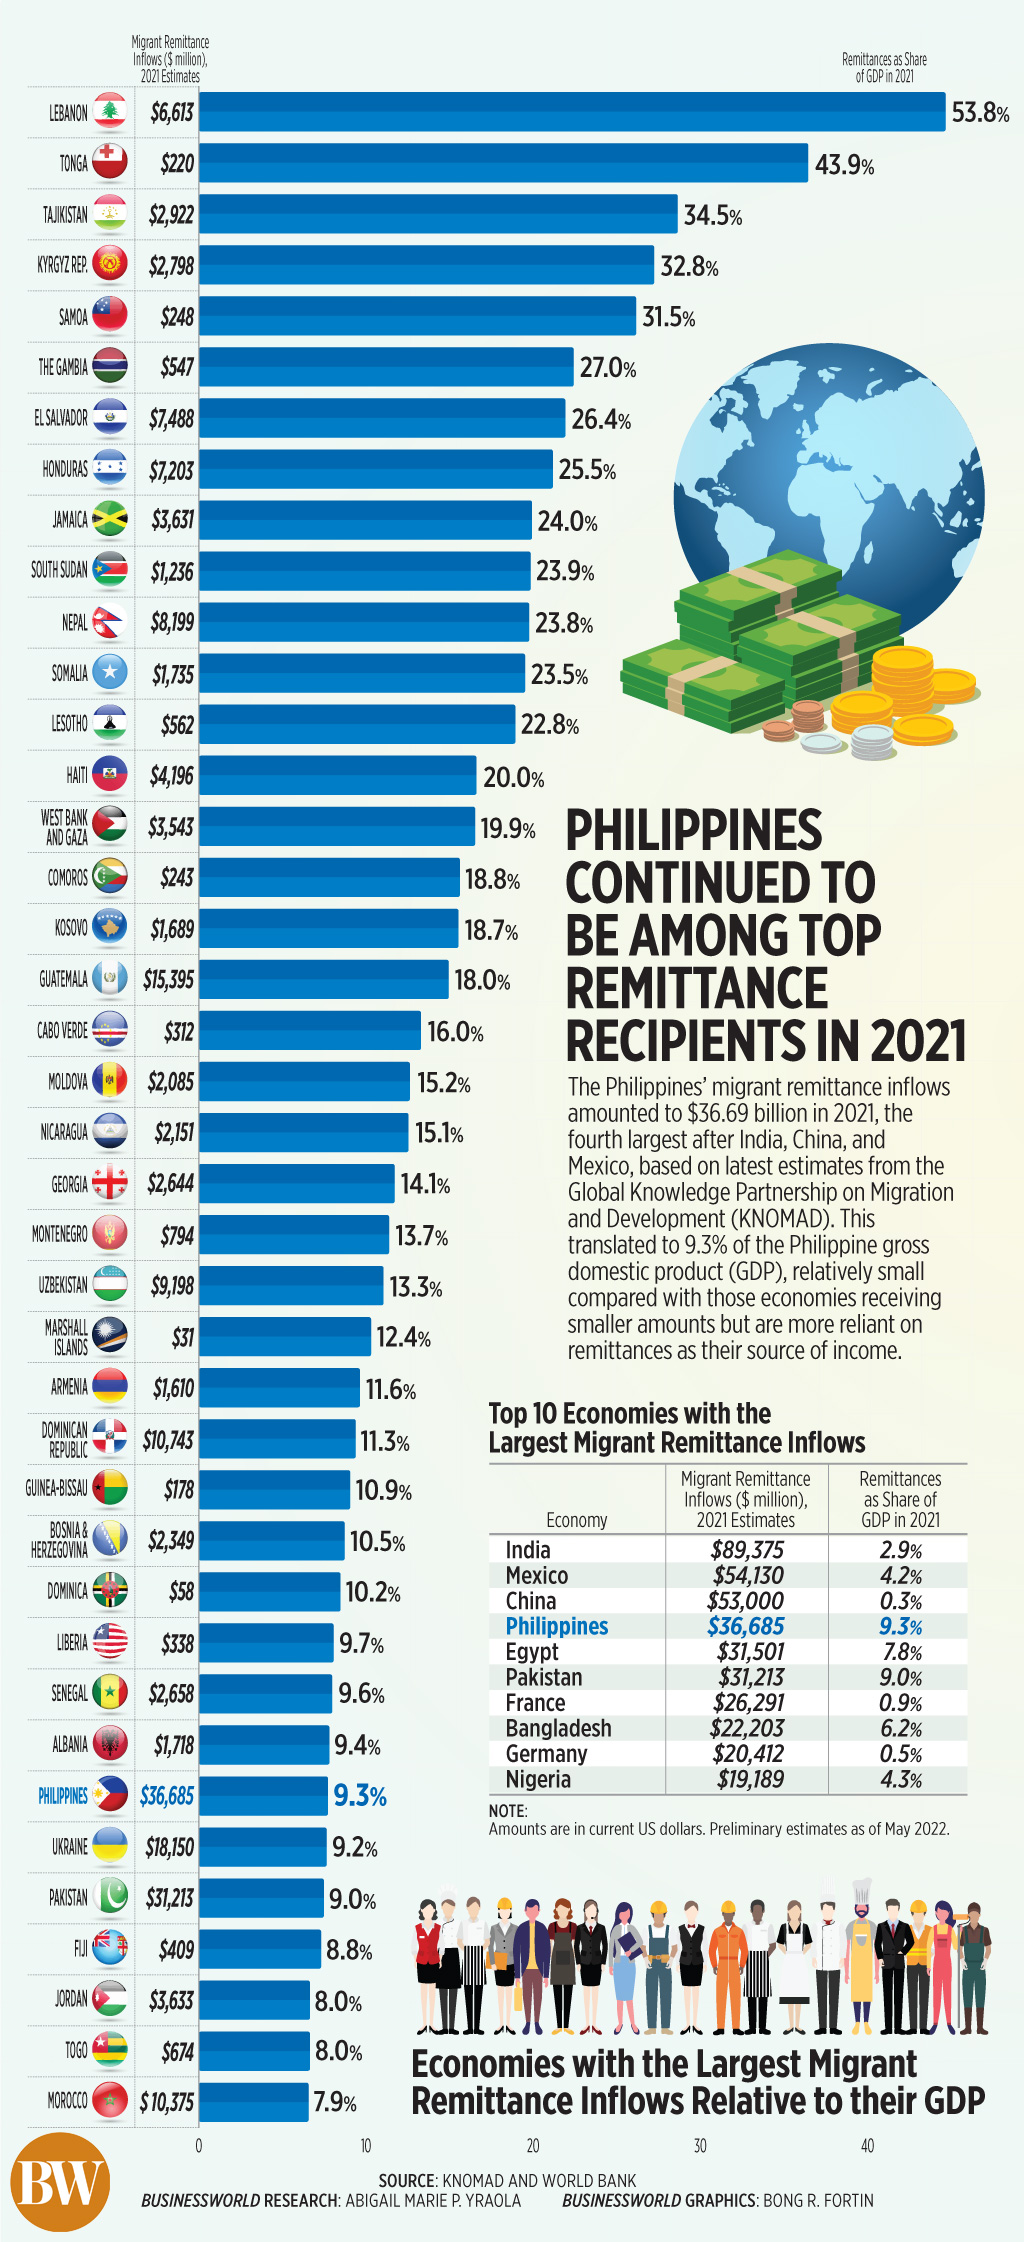 Philippines continued to be among top remittance recipients in 2021